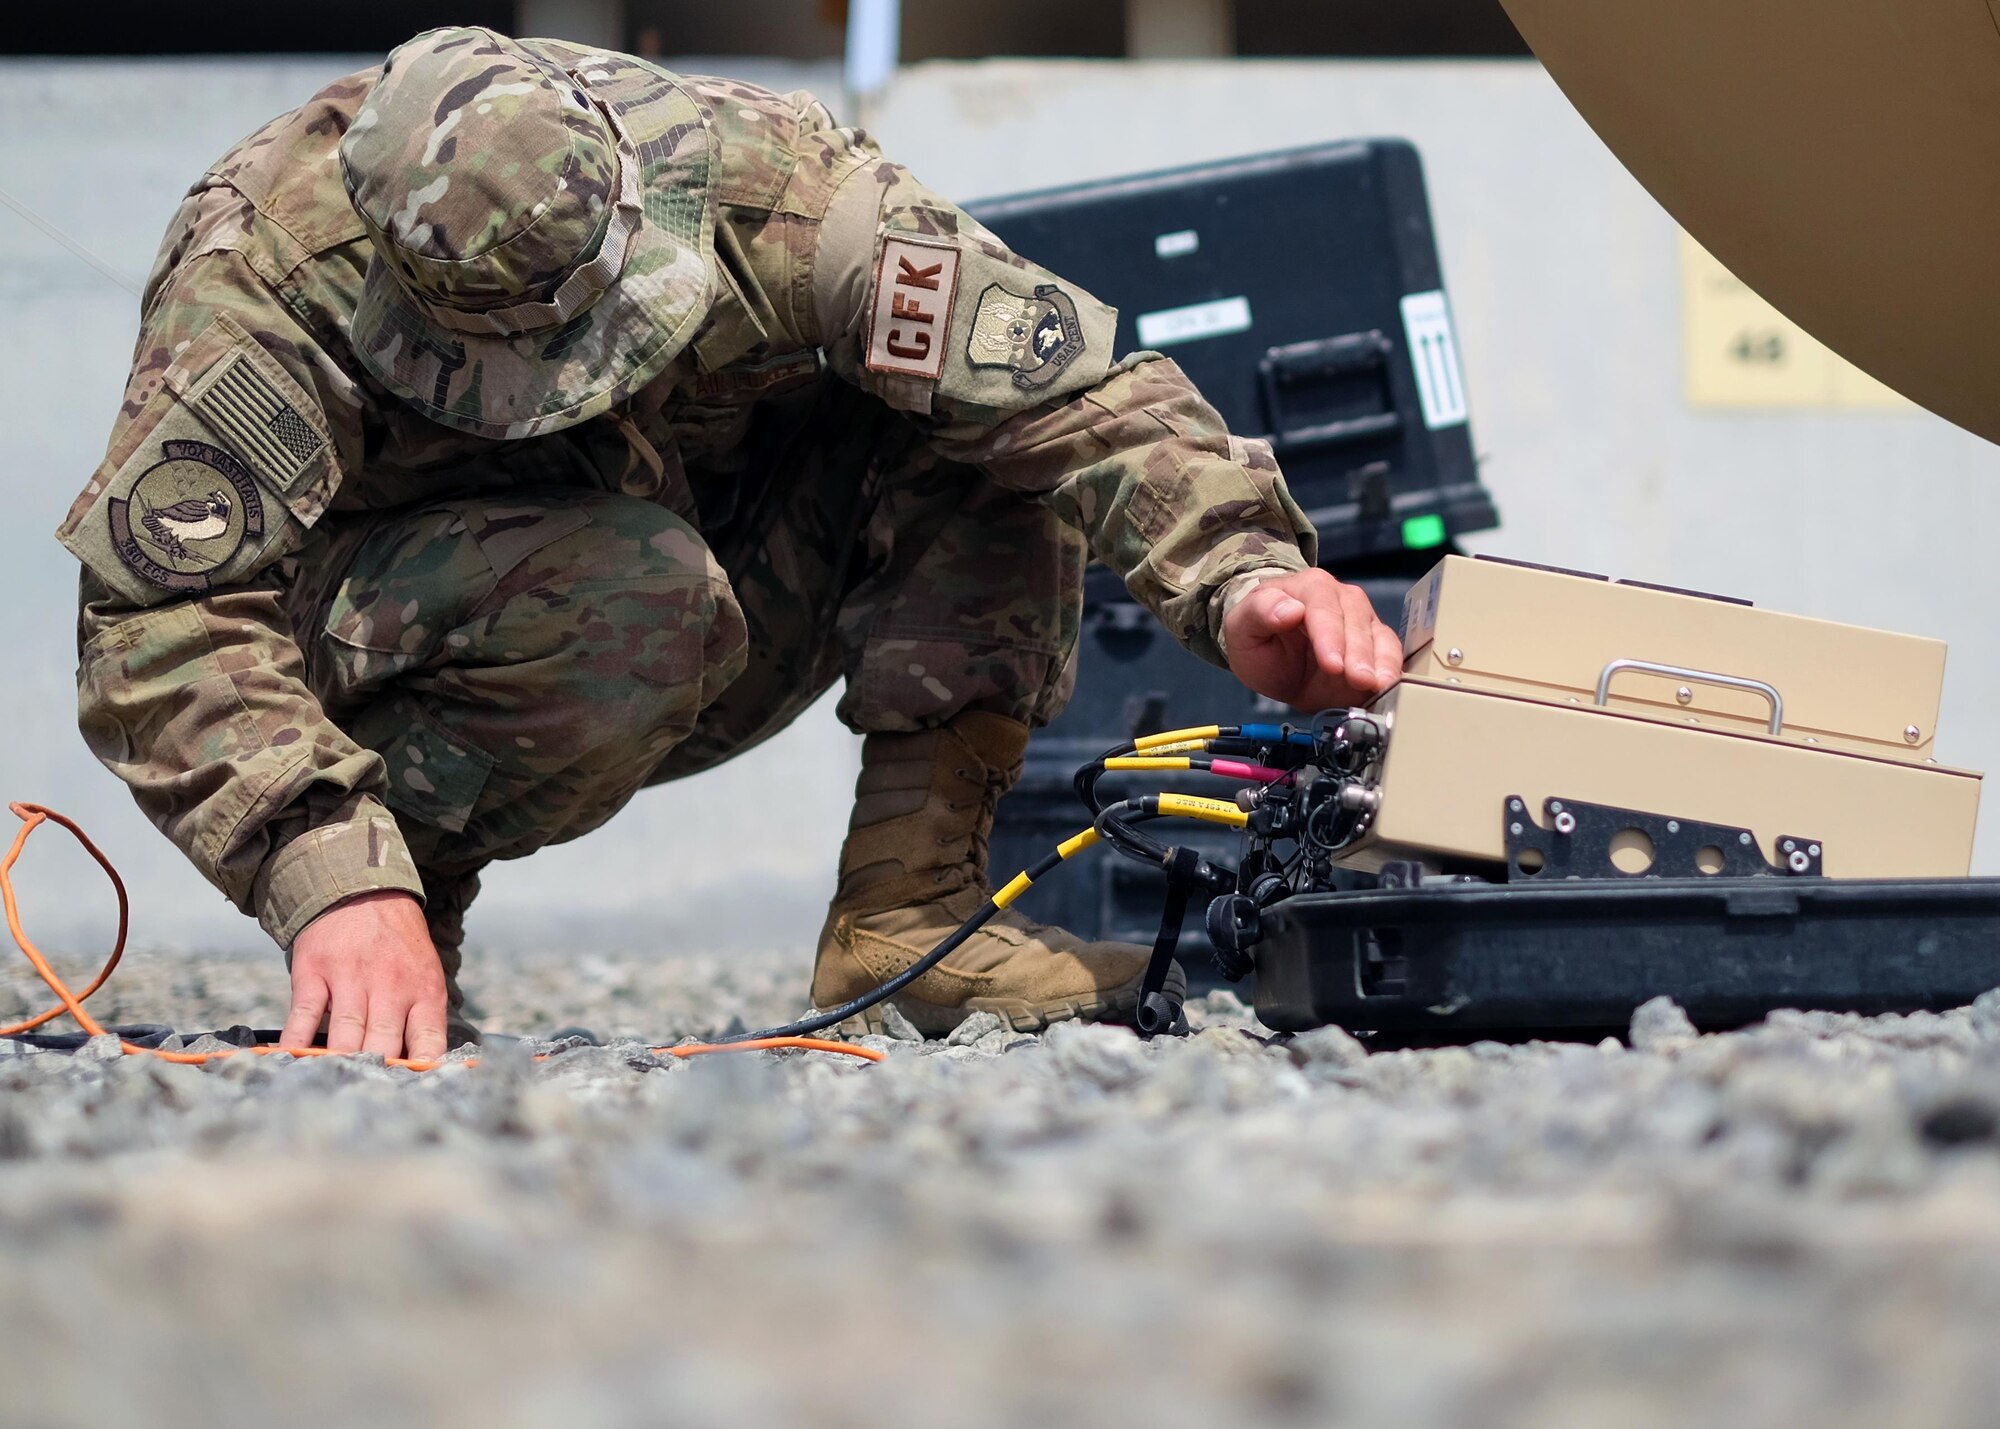 Senior Airman Joseph, 380th Expeditionary Communication Squadron radio frequency transmissions systems Communications Fly-away Kit 30 team lead, verifies data rates and connection status on the Hawkeye satellite June 27, 2017, at undisclosed location in southwest Asia. This Hawkeye satellite is a crucial component of a Communications Fly-away Kit. CFKs can be deployed to remote regions or even locally to maintain secure connections while performing network repairs that would otherwise interrupt installation operations. (U.S. Air Force photo by Senior Airman Preston Webb)